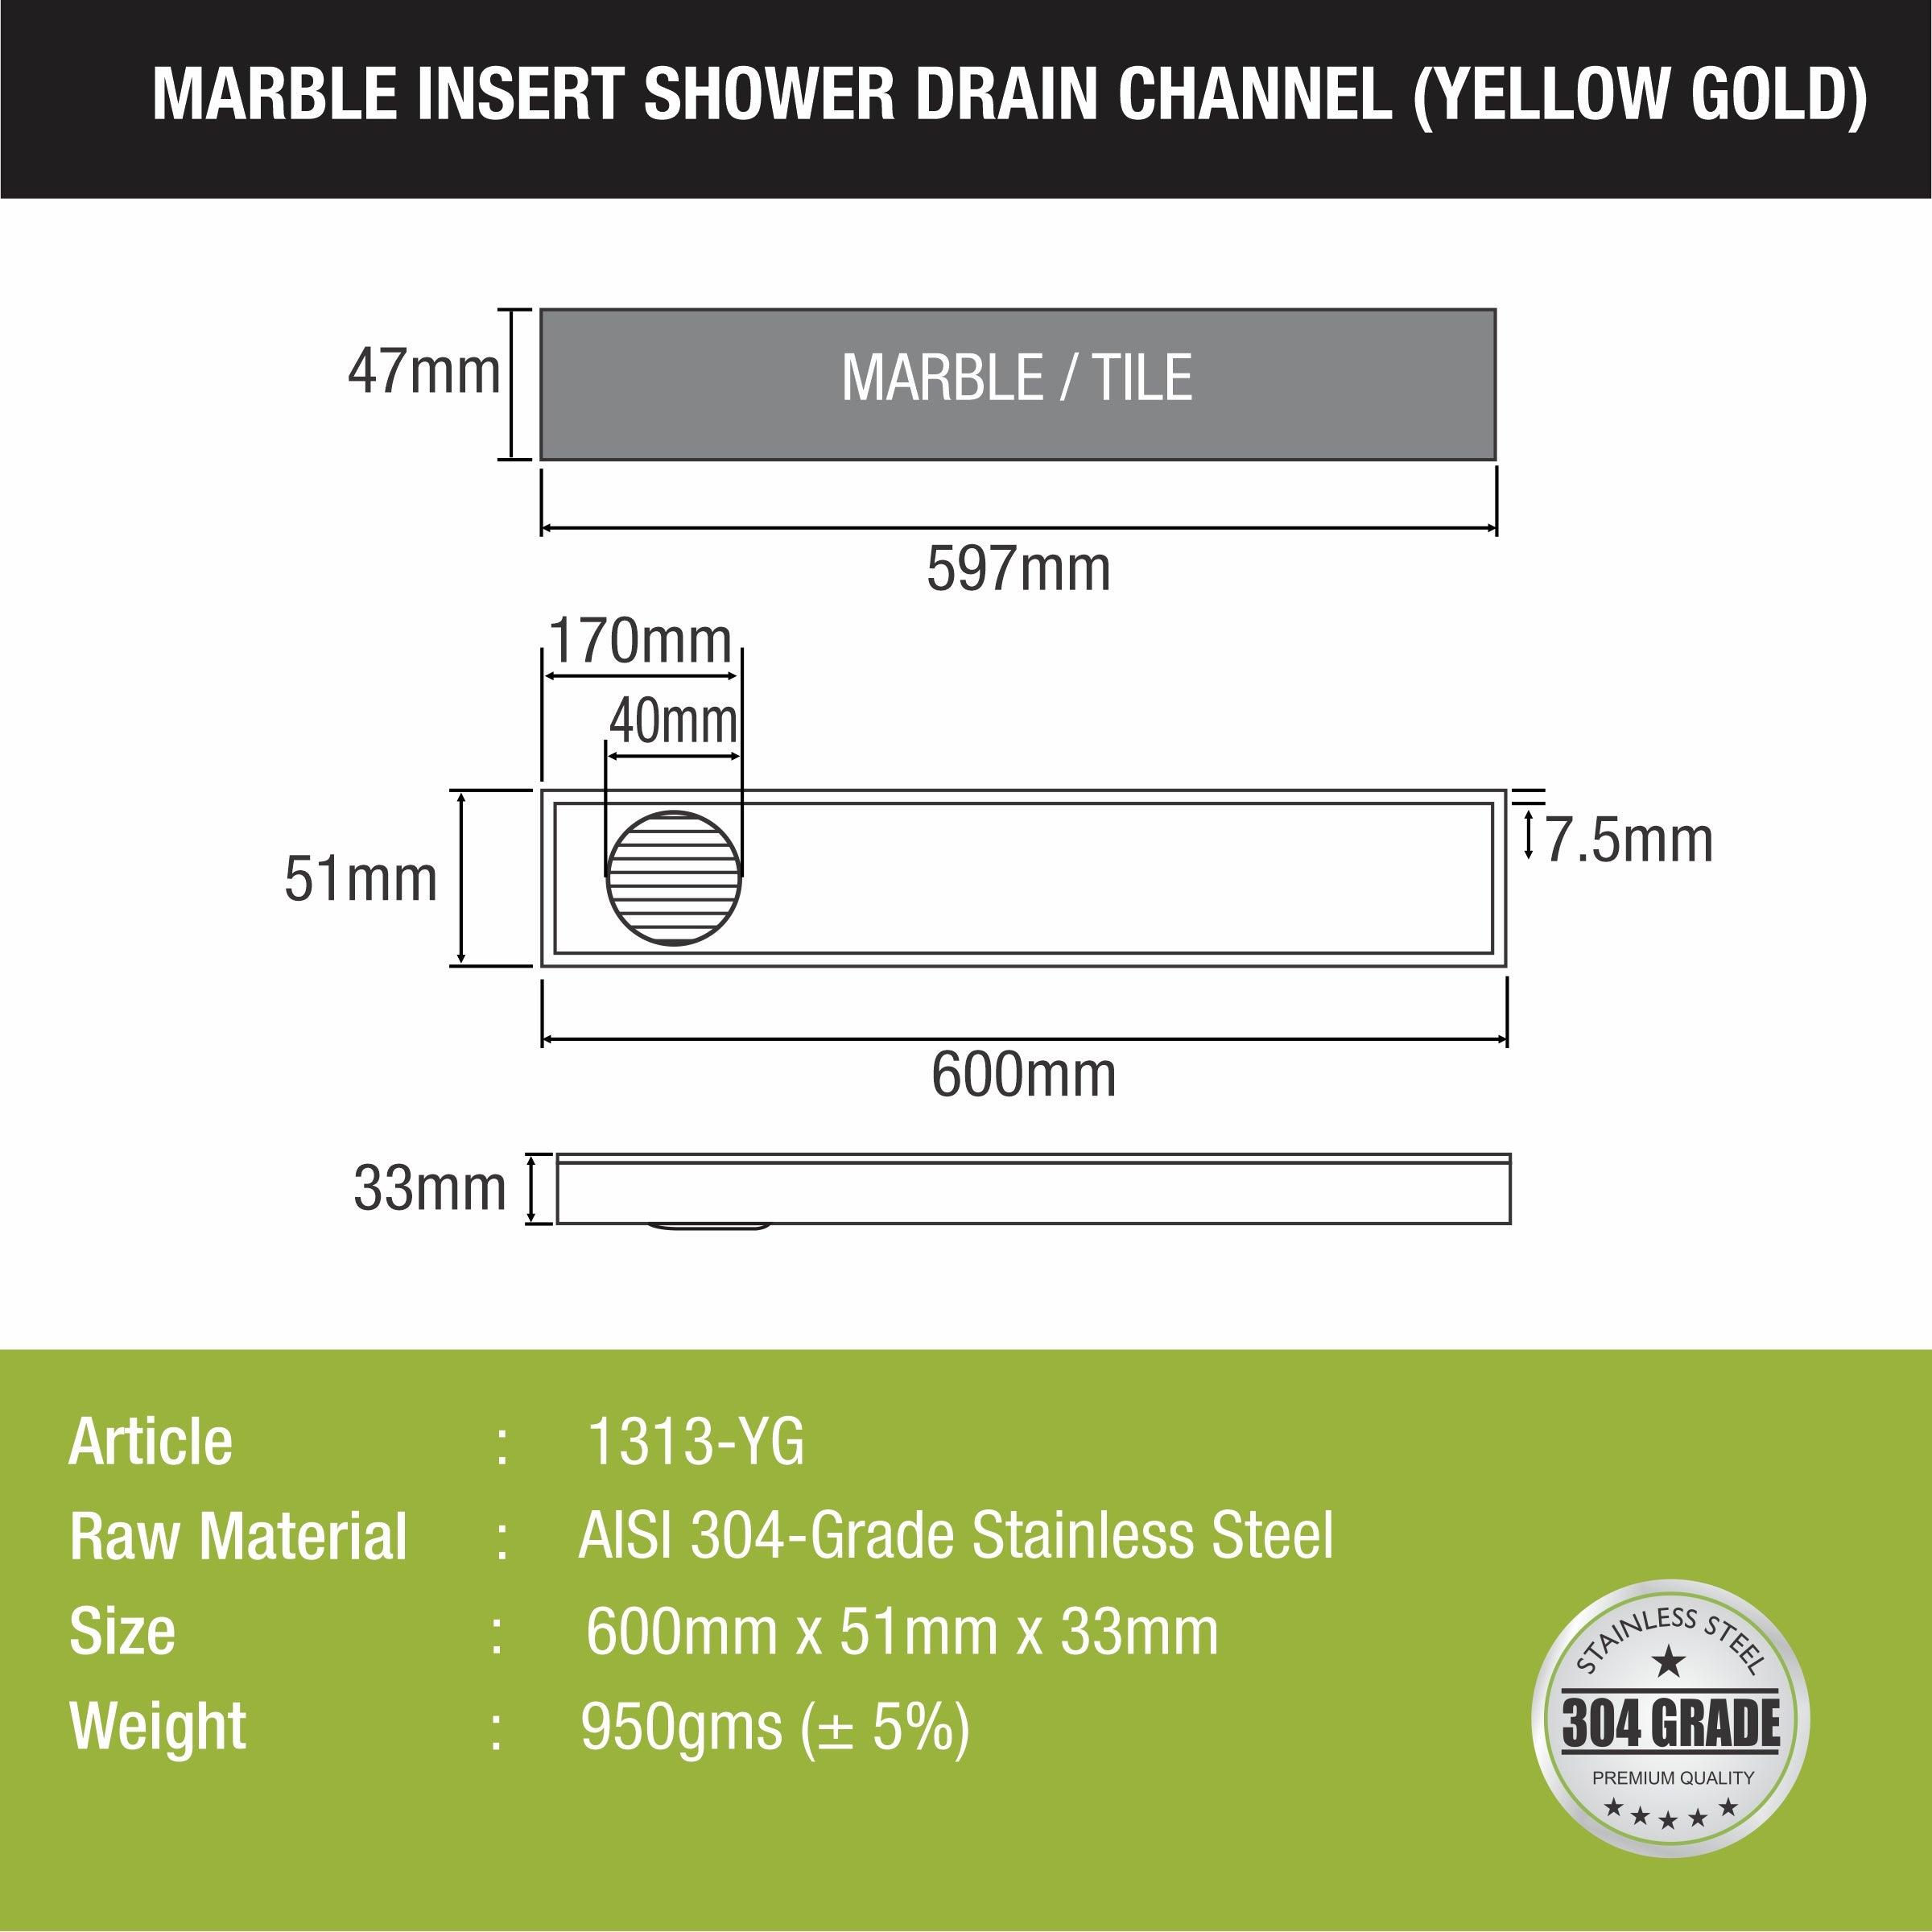 Marble Insert Shower Drain Channel - Yellow Gold (24 x 2 Inches) sizes and dimensions